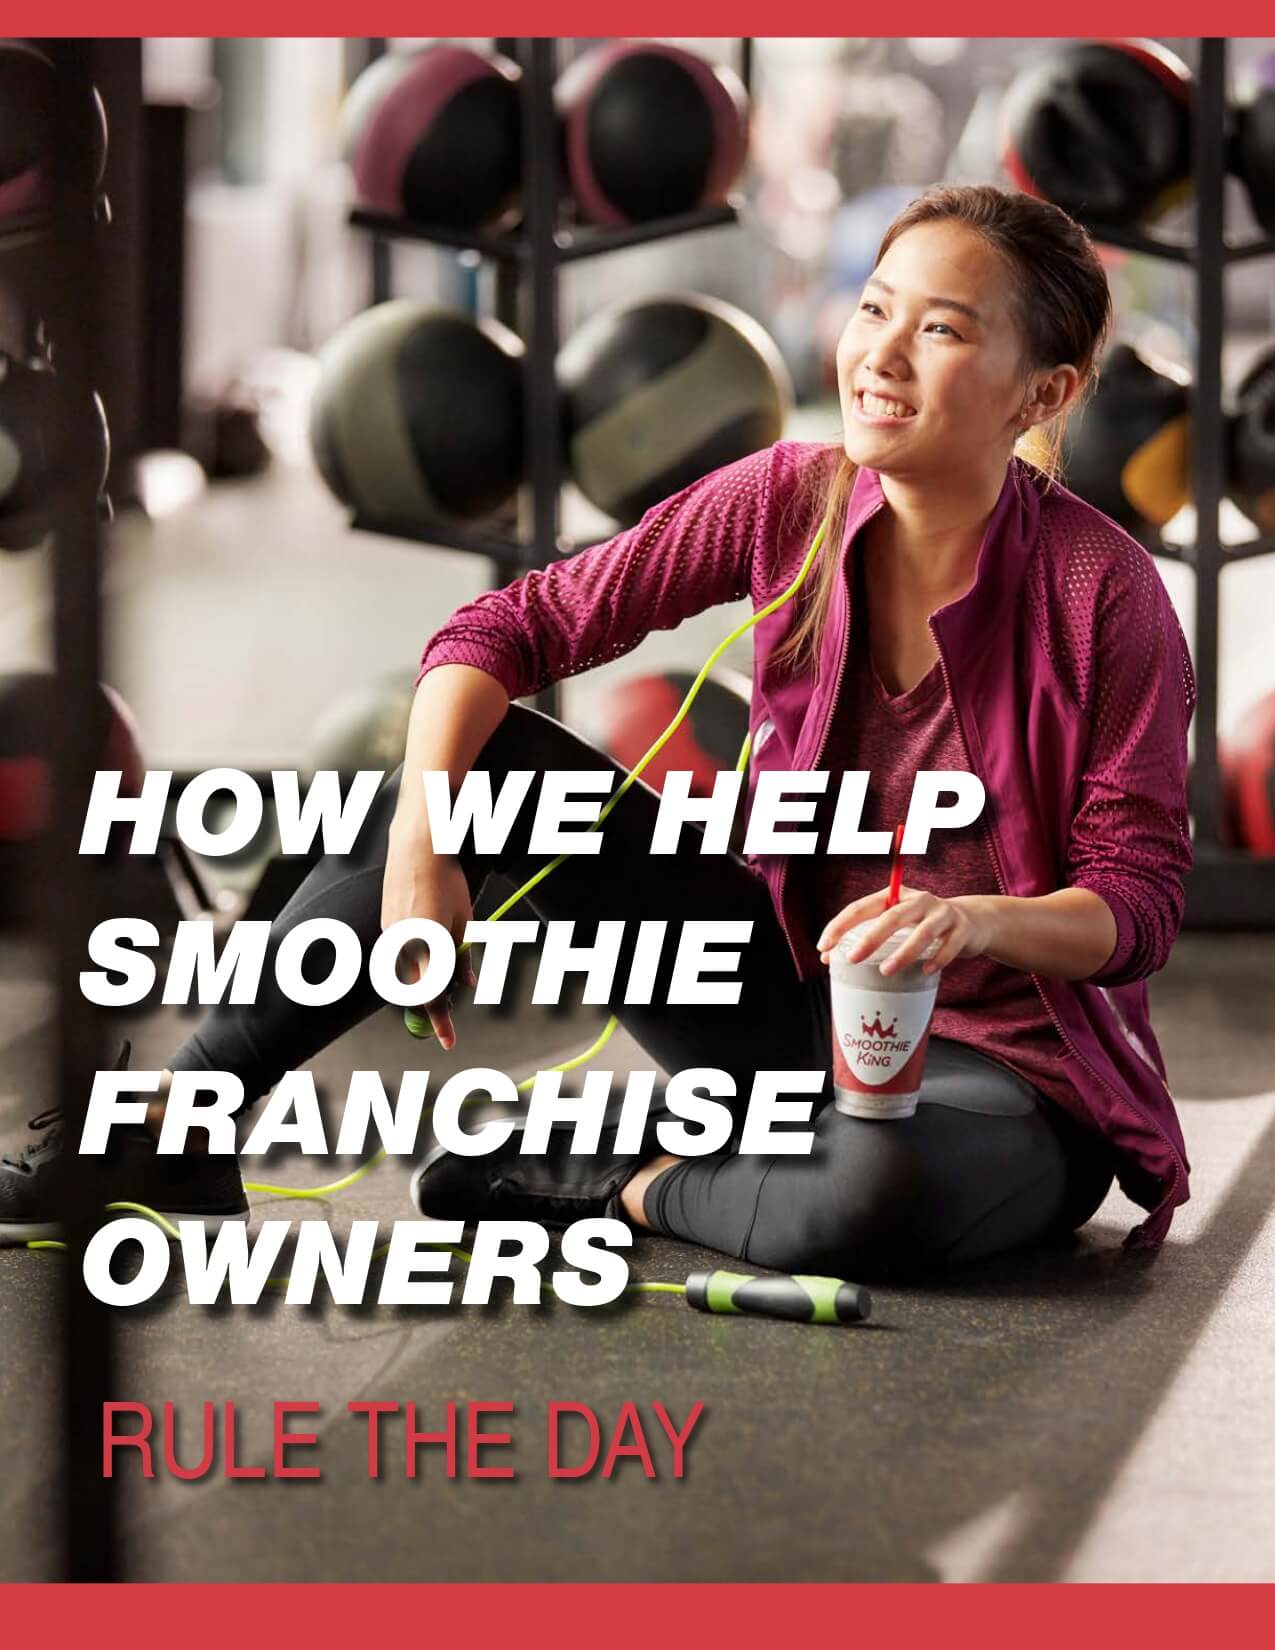 Blending a Personal Passion to help smoothie franchise owners rule the day